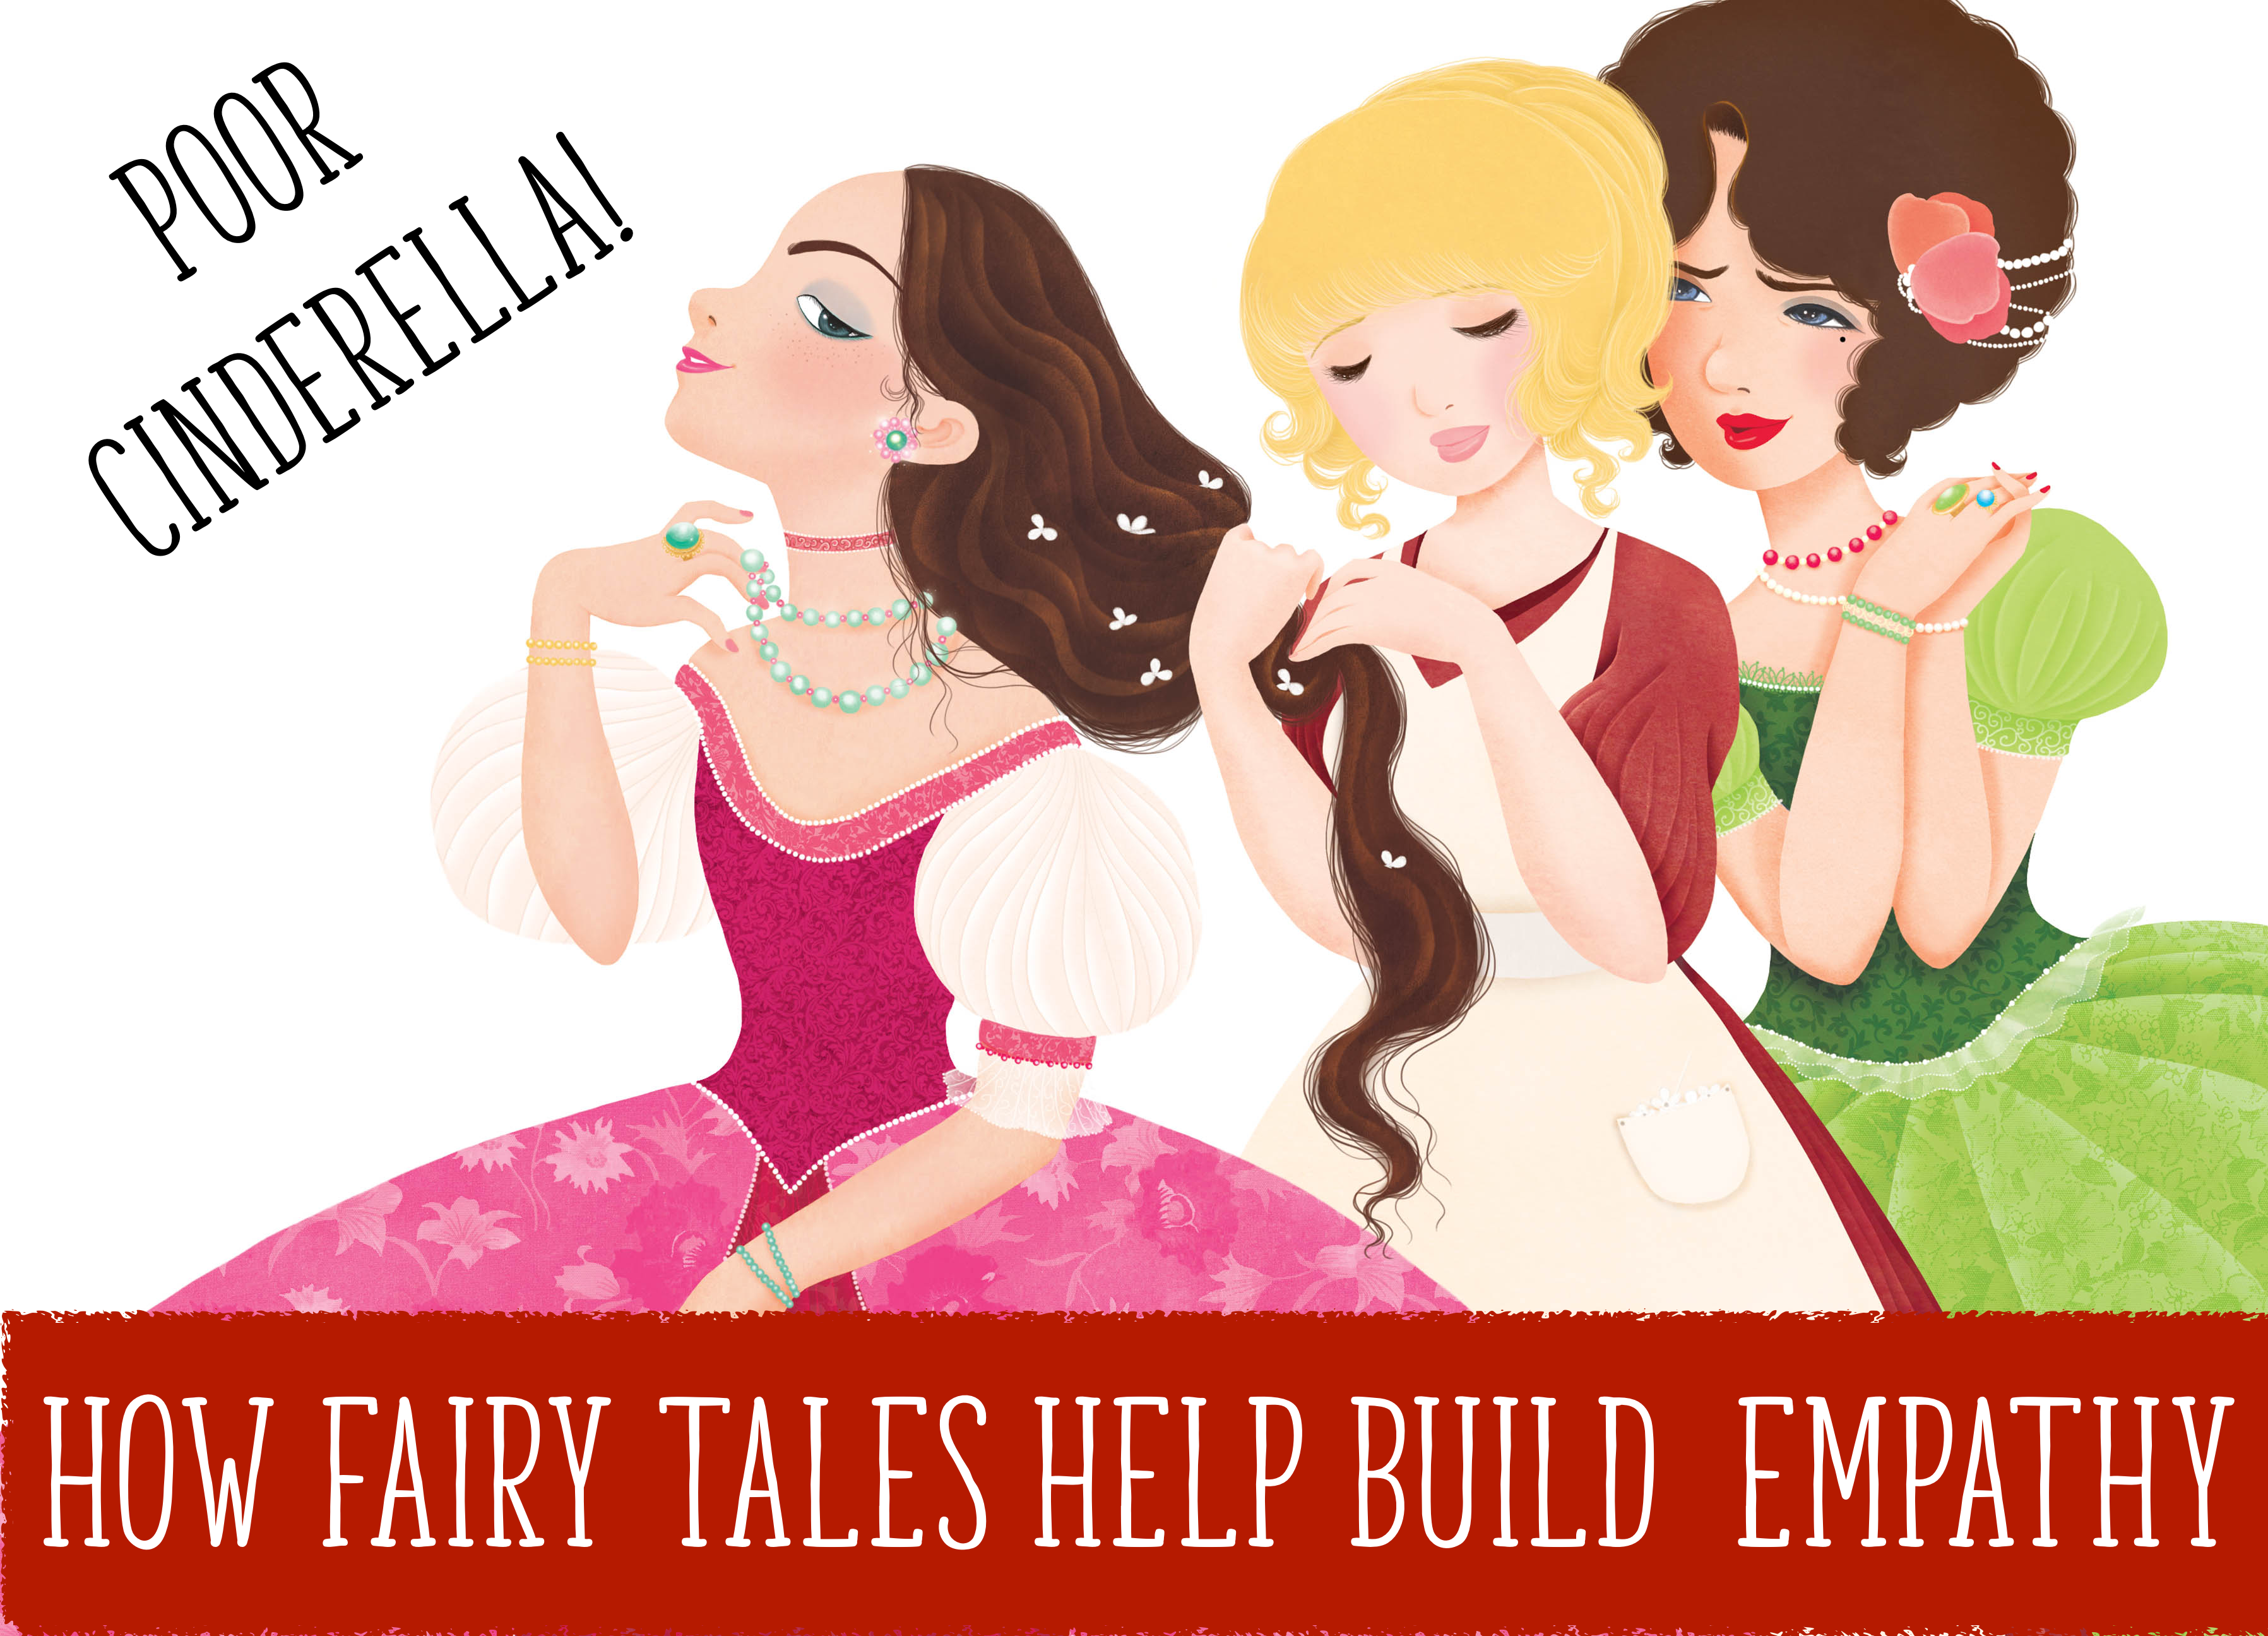 storytime magazine, fairy tales to help build empathy, magazine subscriptions for kids, cinderella